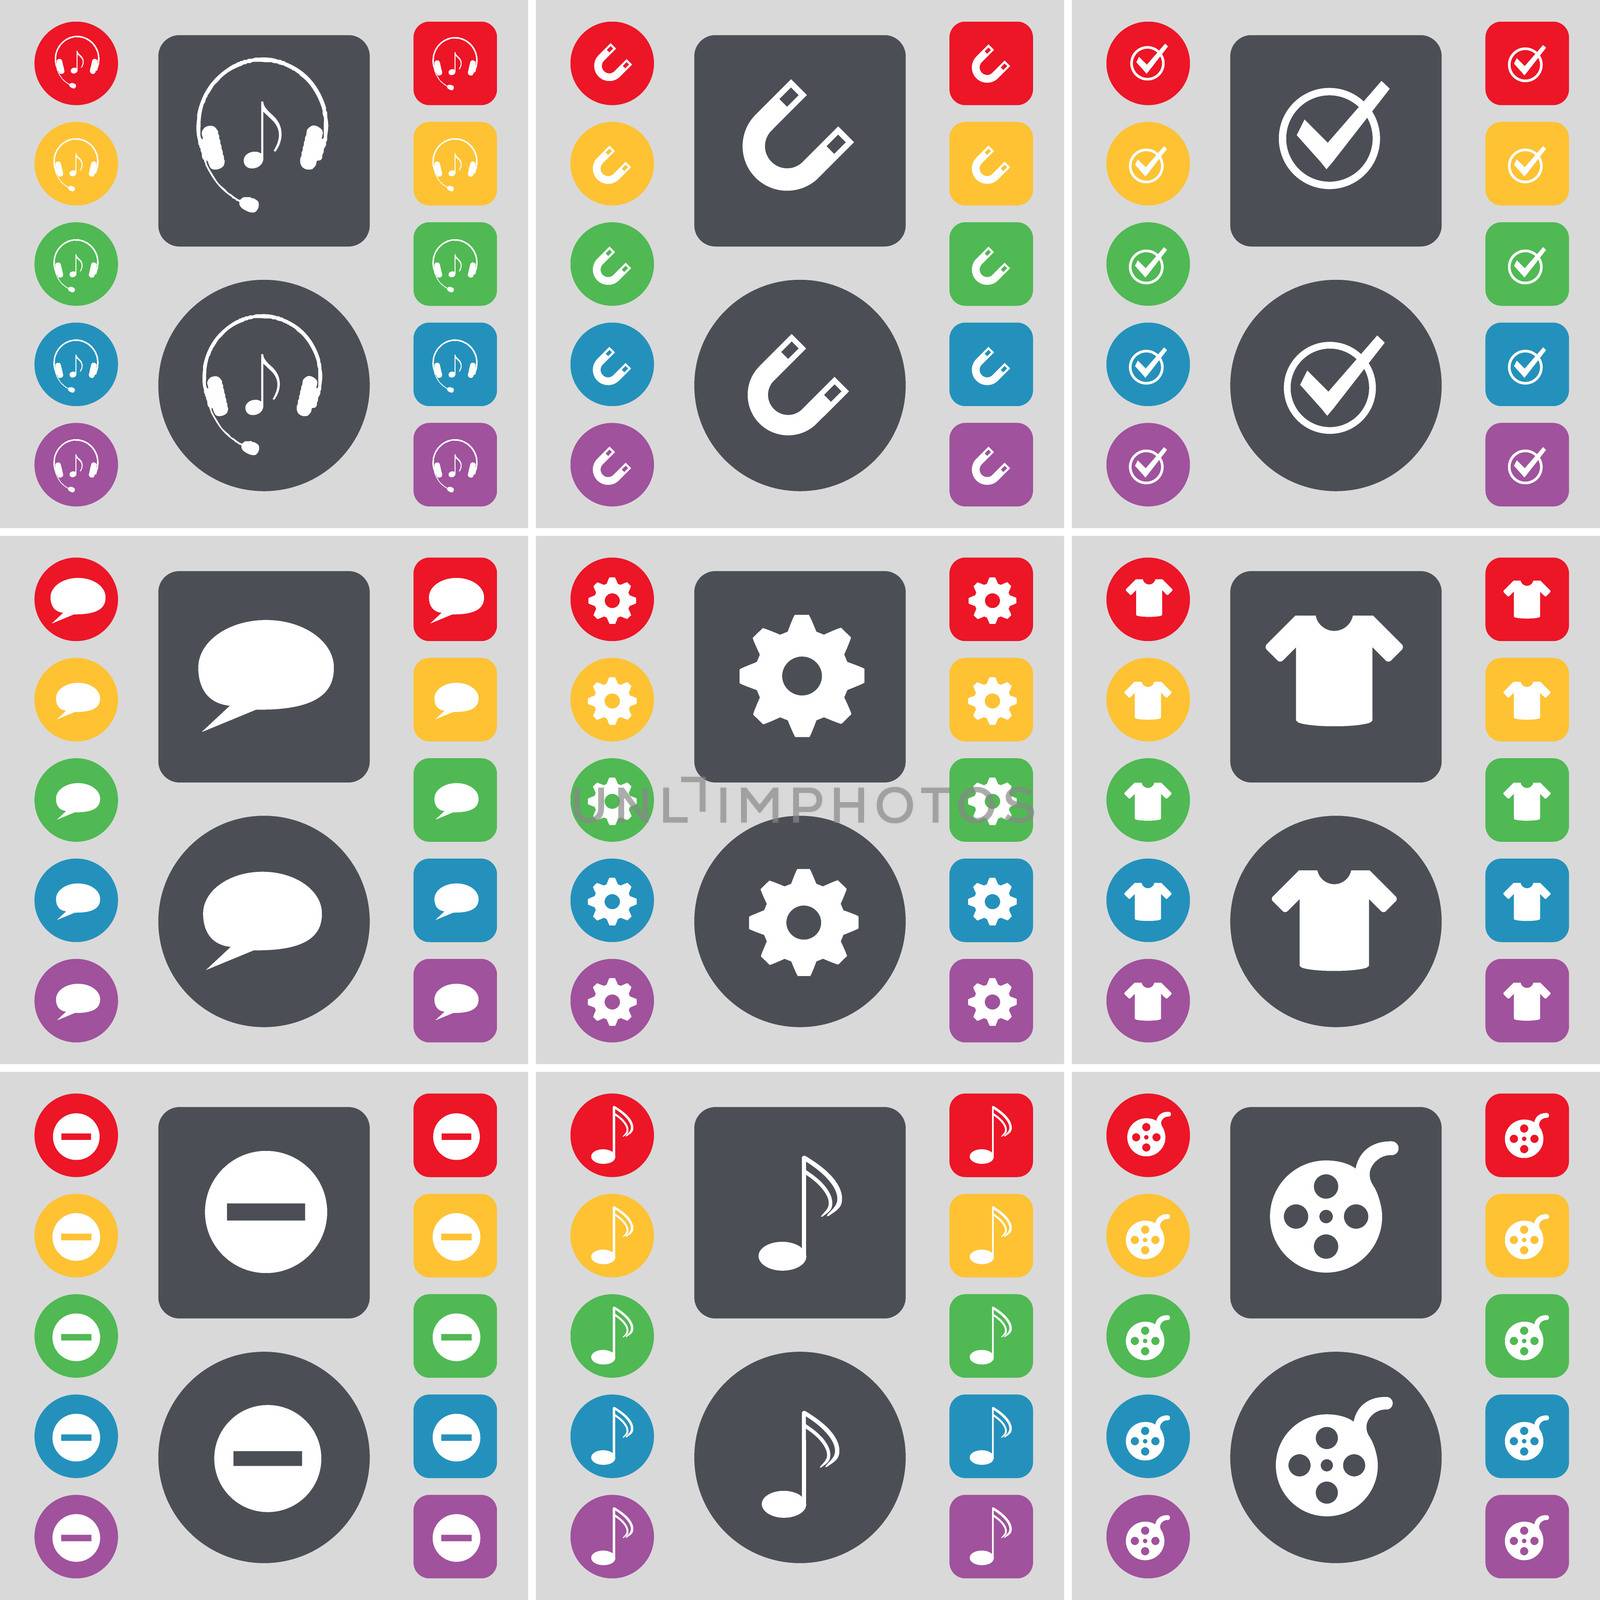 Headphones, Magnet, Tick, Chat bubble, Gear, T-Shirt, Minus, Note, Videotape icon symbol. A large set of flat, colored buttons for your design. illustration